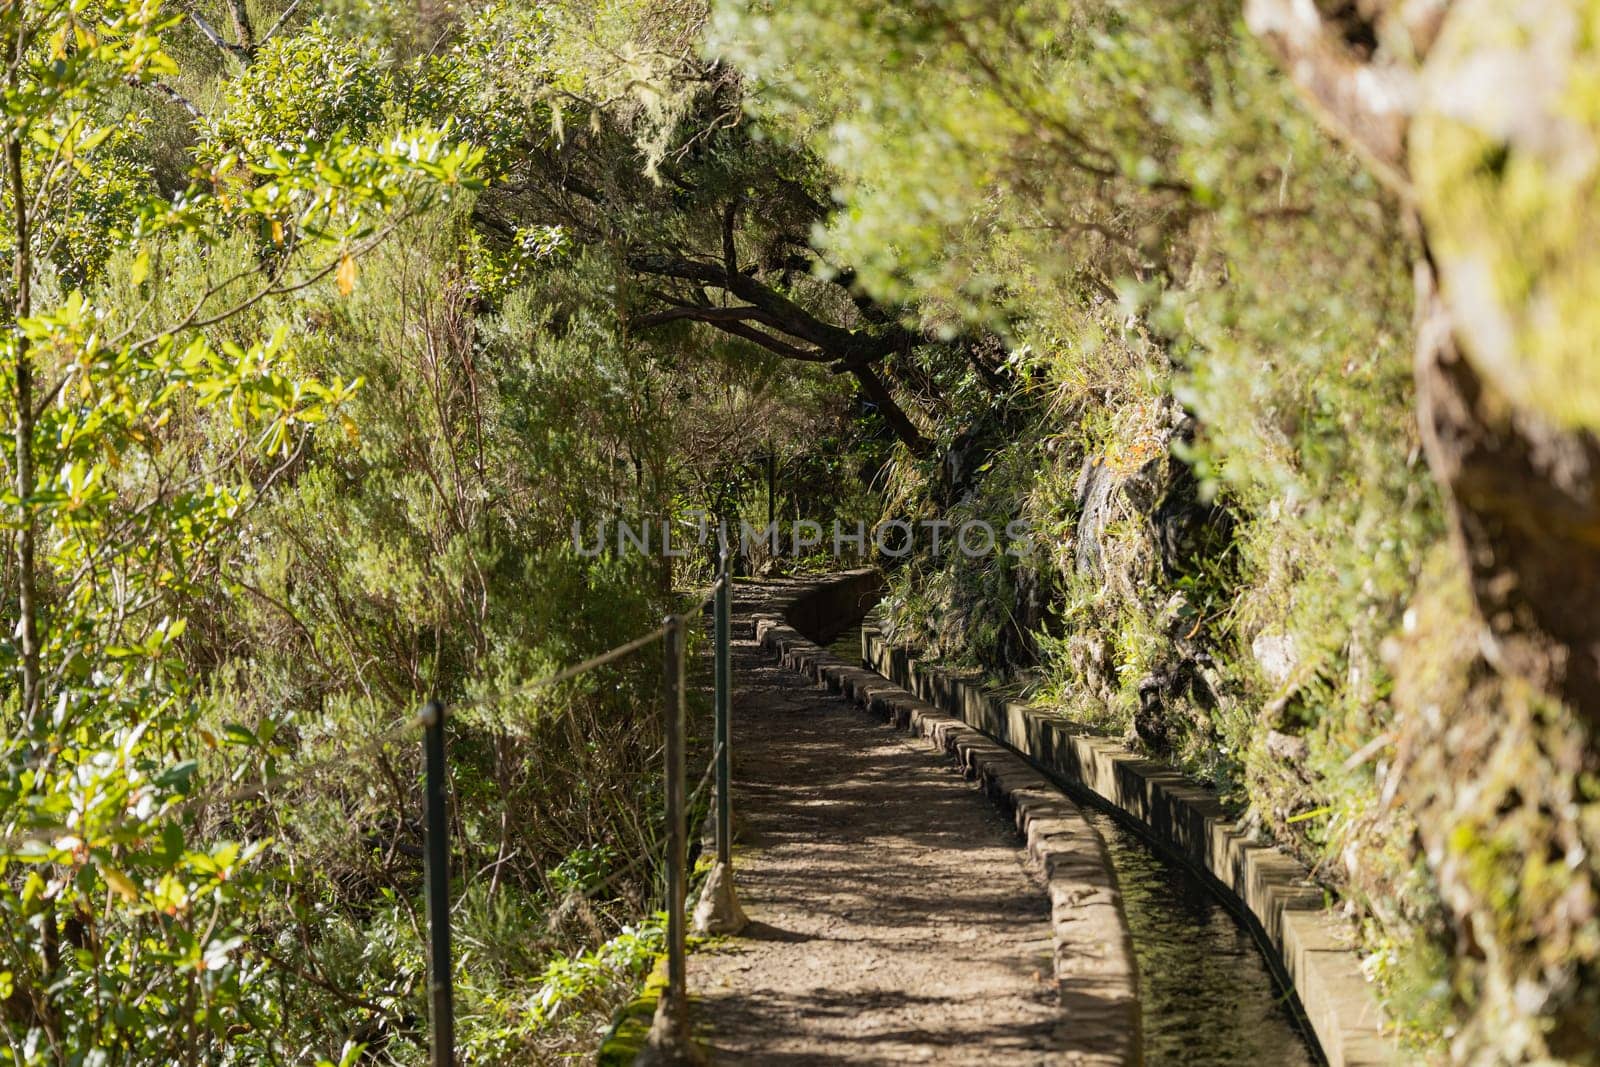 Irrigation canal with hiking path through the mountains at Madeira Island, Portugal